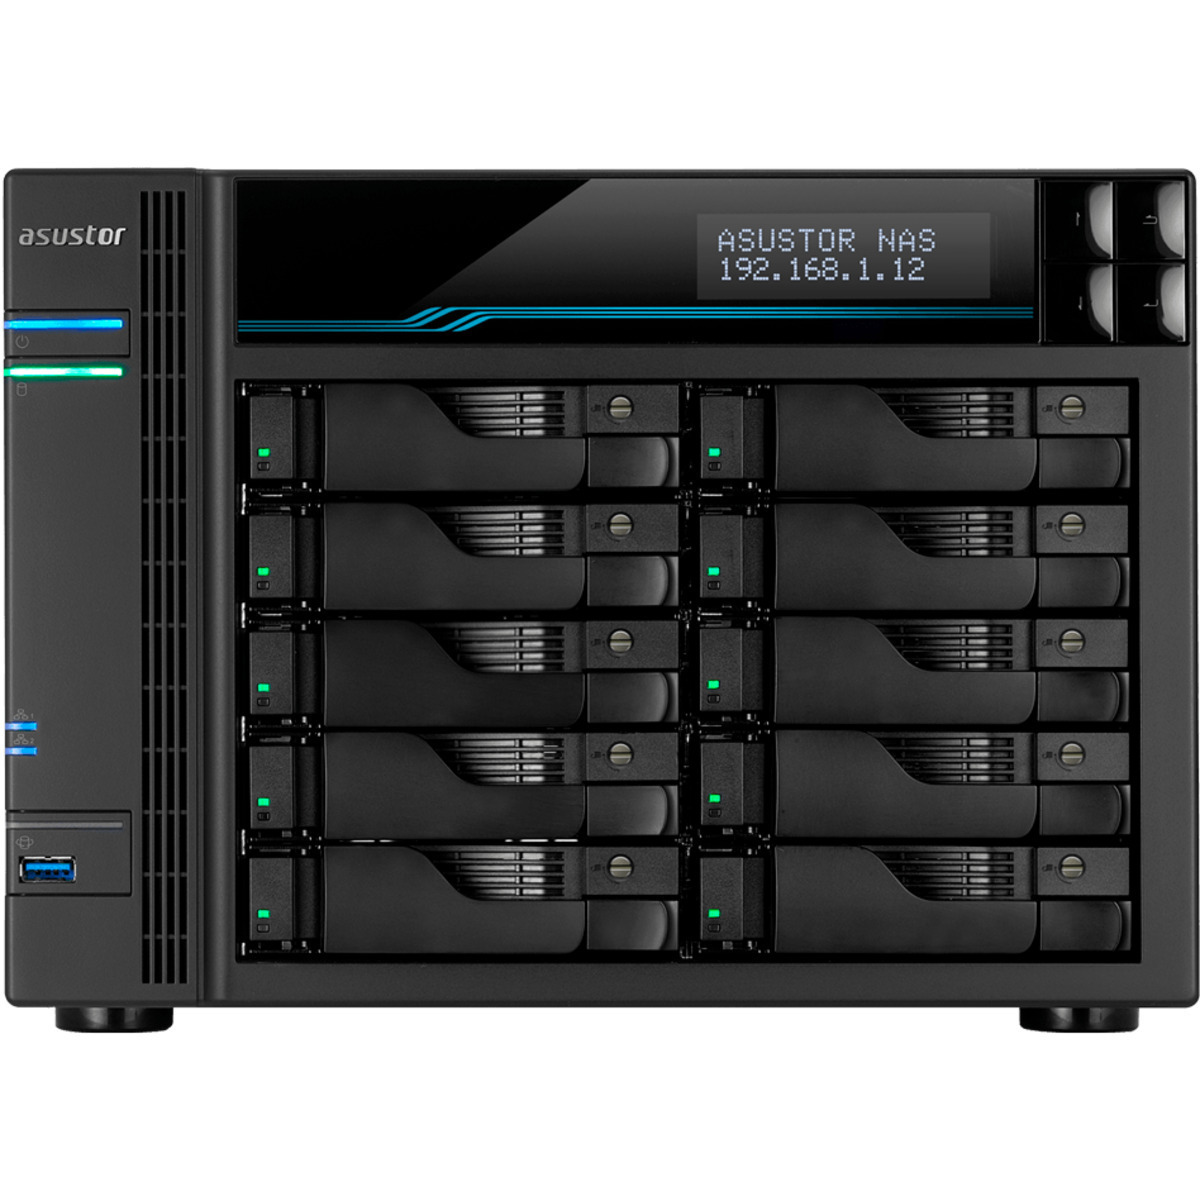 ASUSTOR AS7110T Lockerstor 10 Pro 168tb 10-Bay Desktop Multimedia / Power User / Business NAS - Network Attached Storage Device 7x24tb Western Digital Ultrastar HC580 SED WUH722424ALE6L1 3.5 7200rpm SATA 6Gb/s HDD ENTERPRISE Class Drives Installed - Burn-In Tested AS7110T Lockerstor 10 Pro